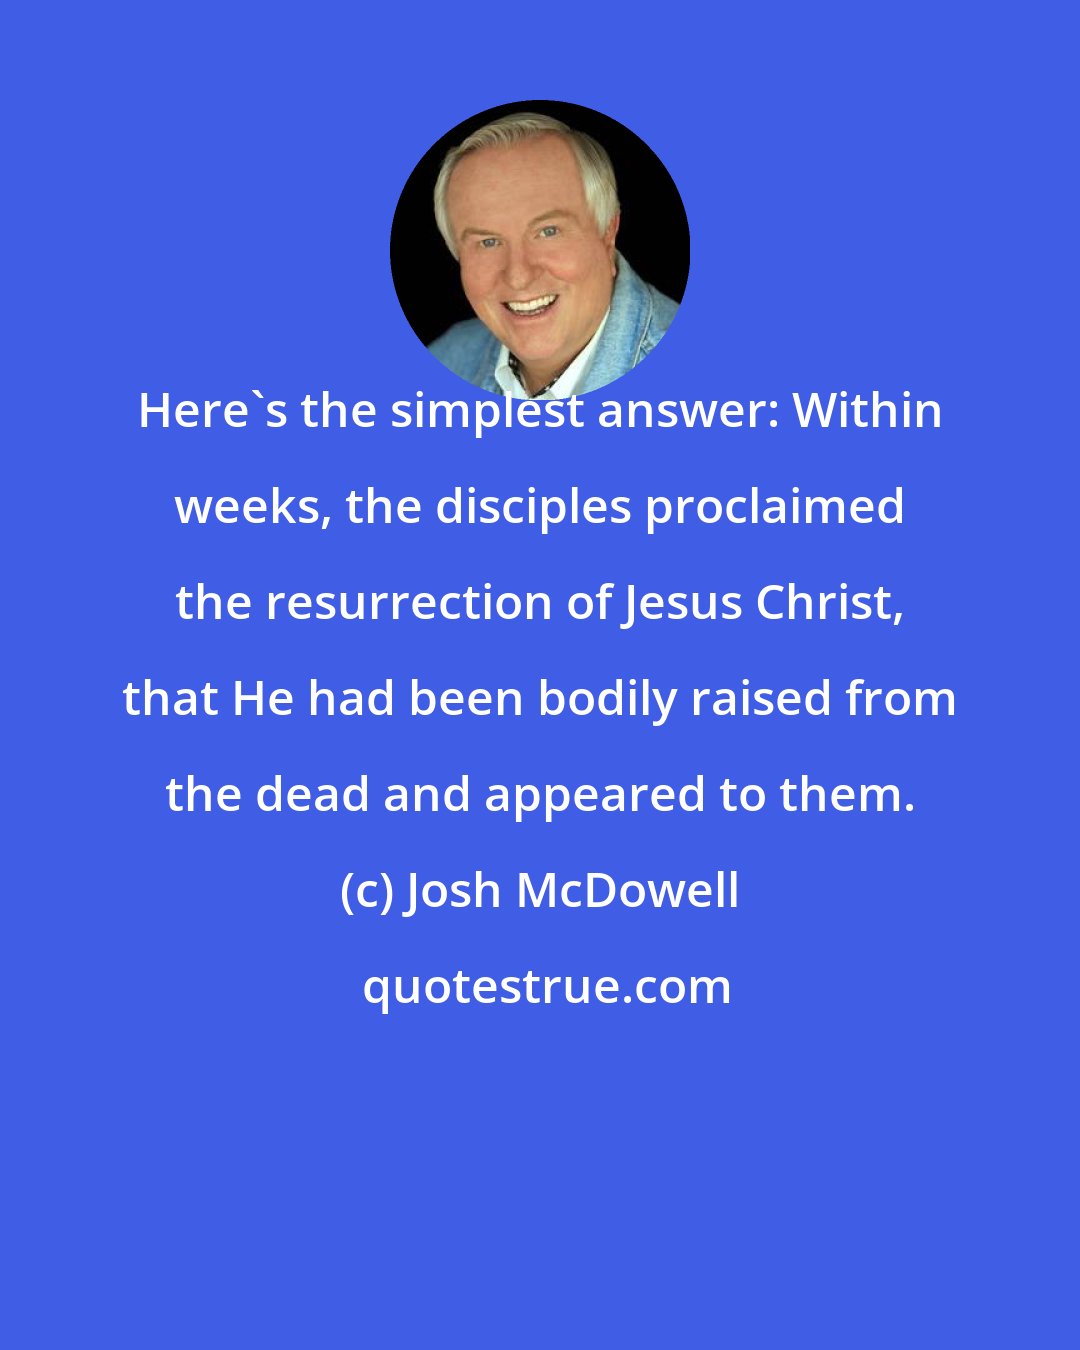 Josh McDowell: Here's the simplest answer: Within weeks, the disciples proclaimed the resurrection of Jesus Christ, that He had been bodily raised from the dead and appeared to them.